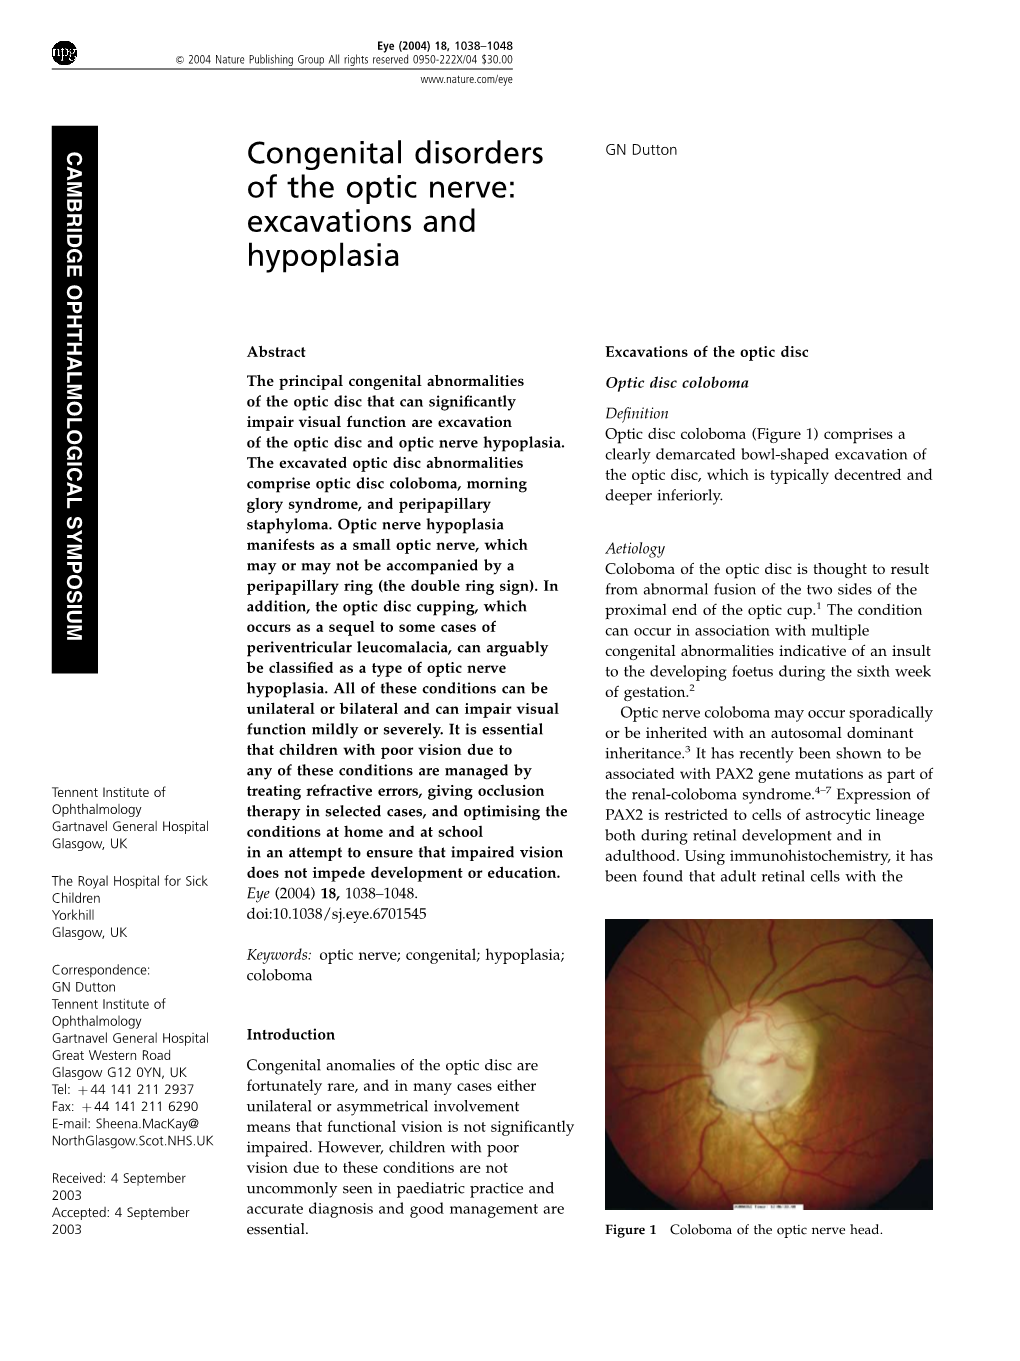 Congenital Disorders of the Optic Nerve GN Dutton 1039